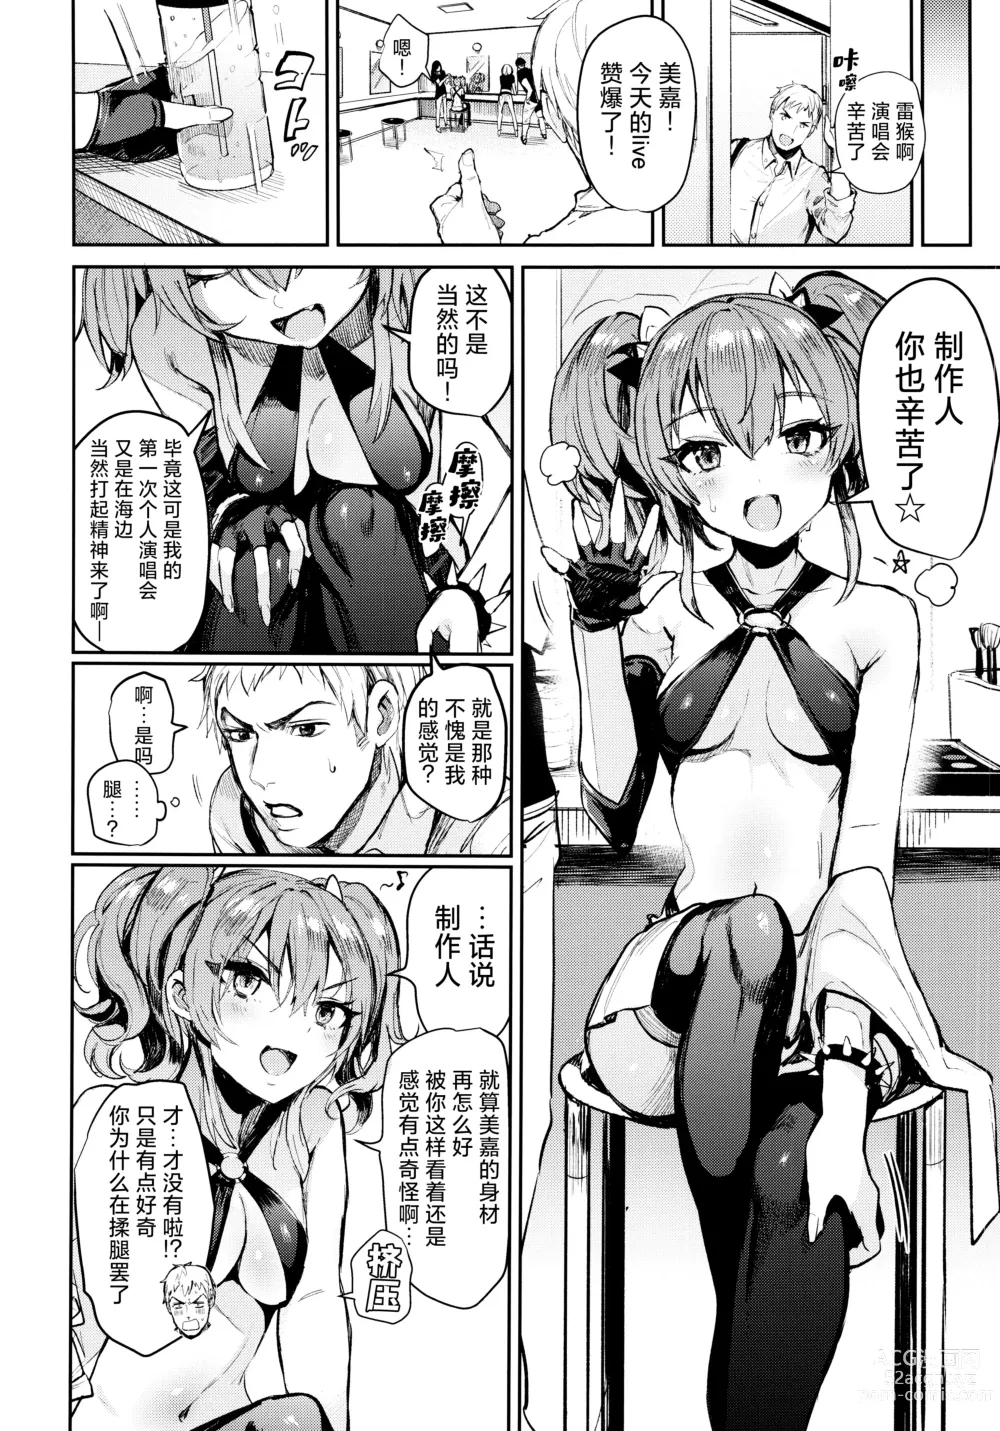 Page 6 of doujinshi 与美嘉两个人。